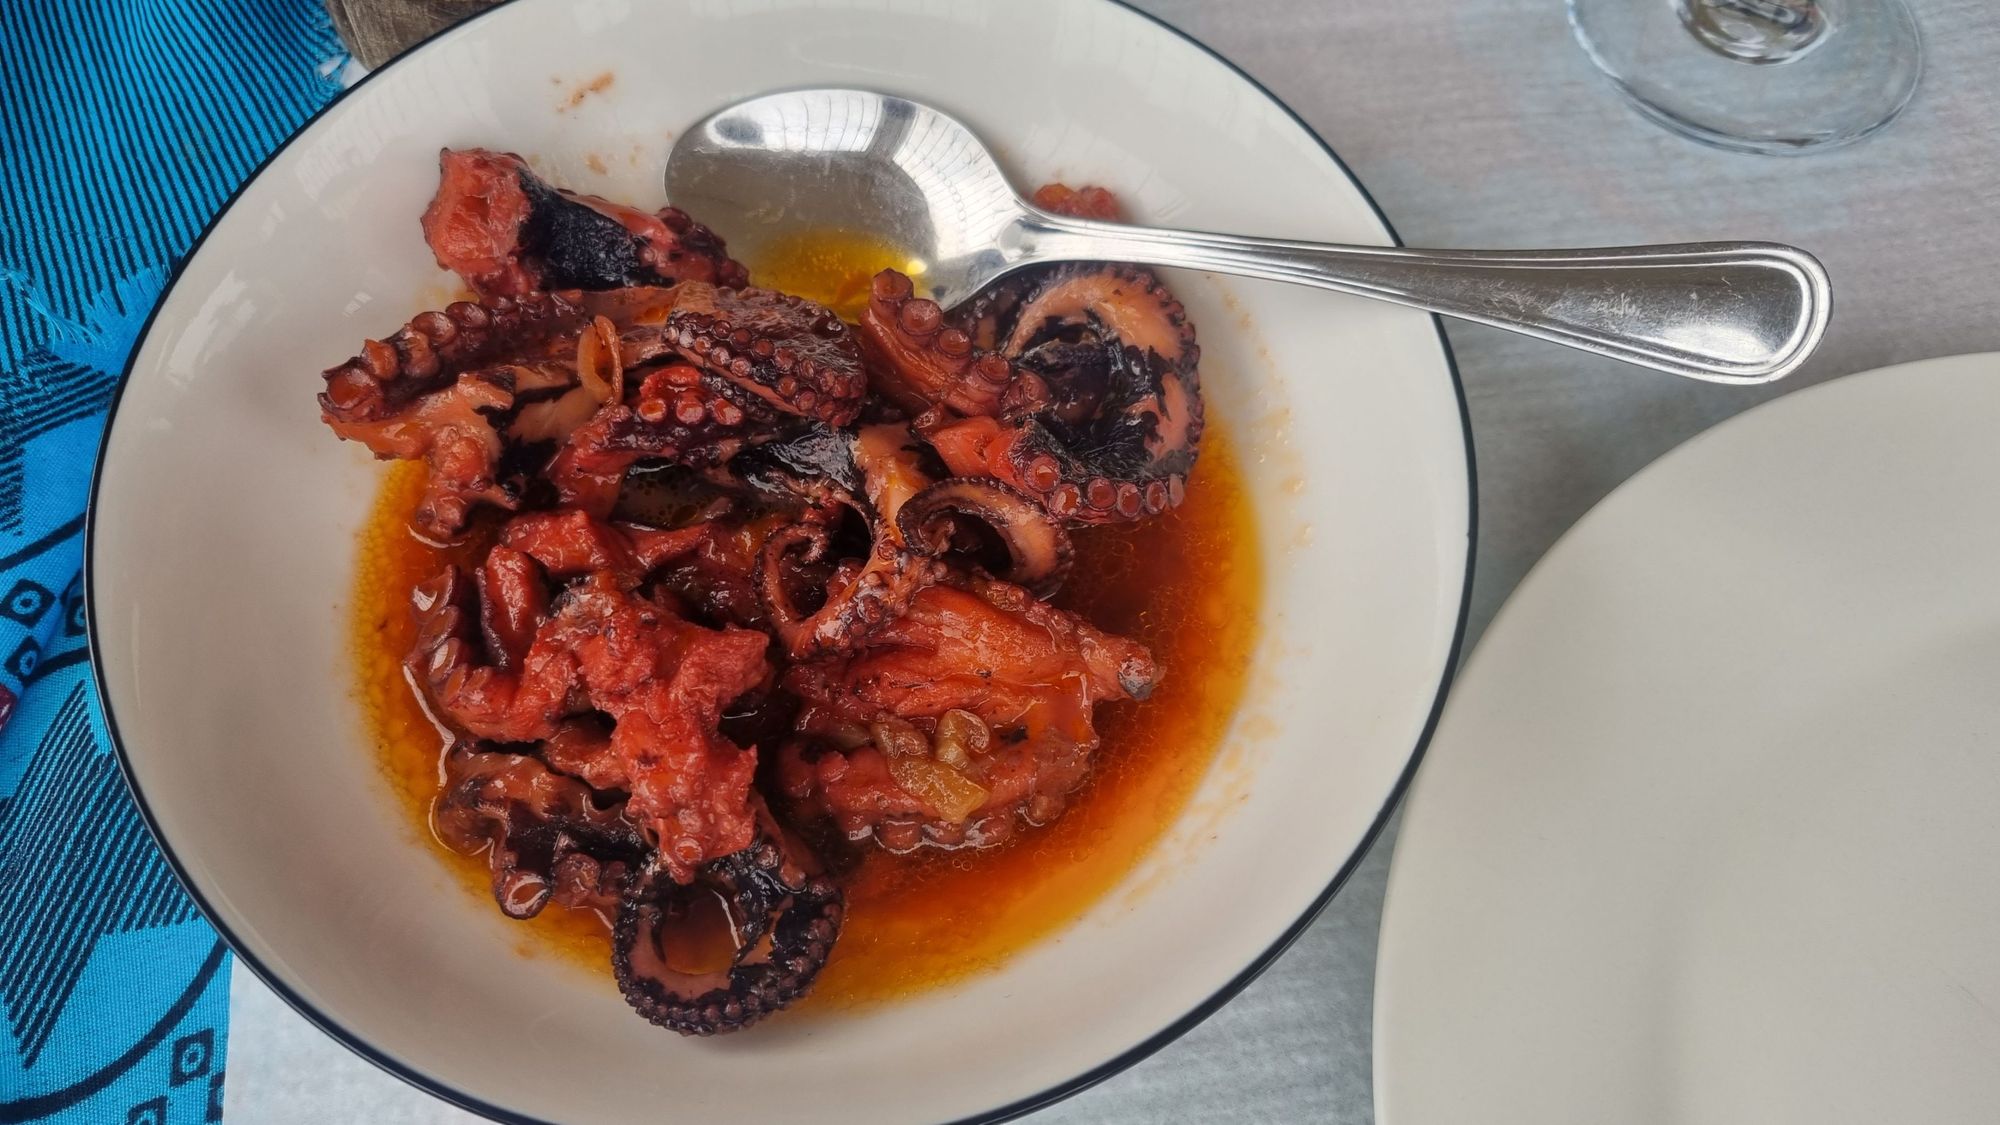 Stewed octopus, served on Sao Tome and Principe.